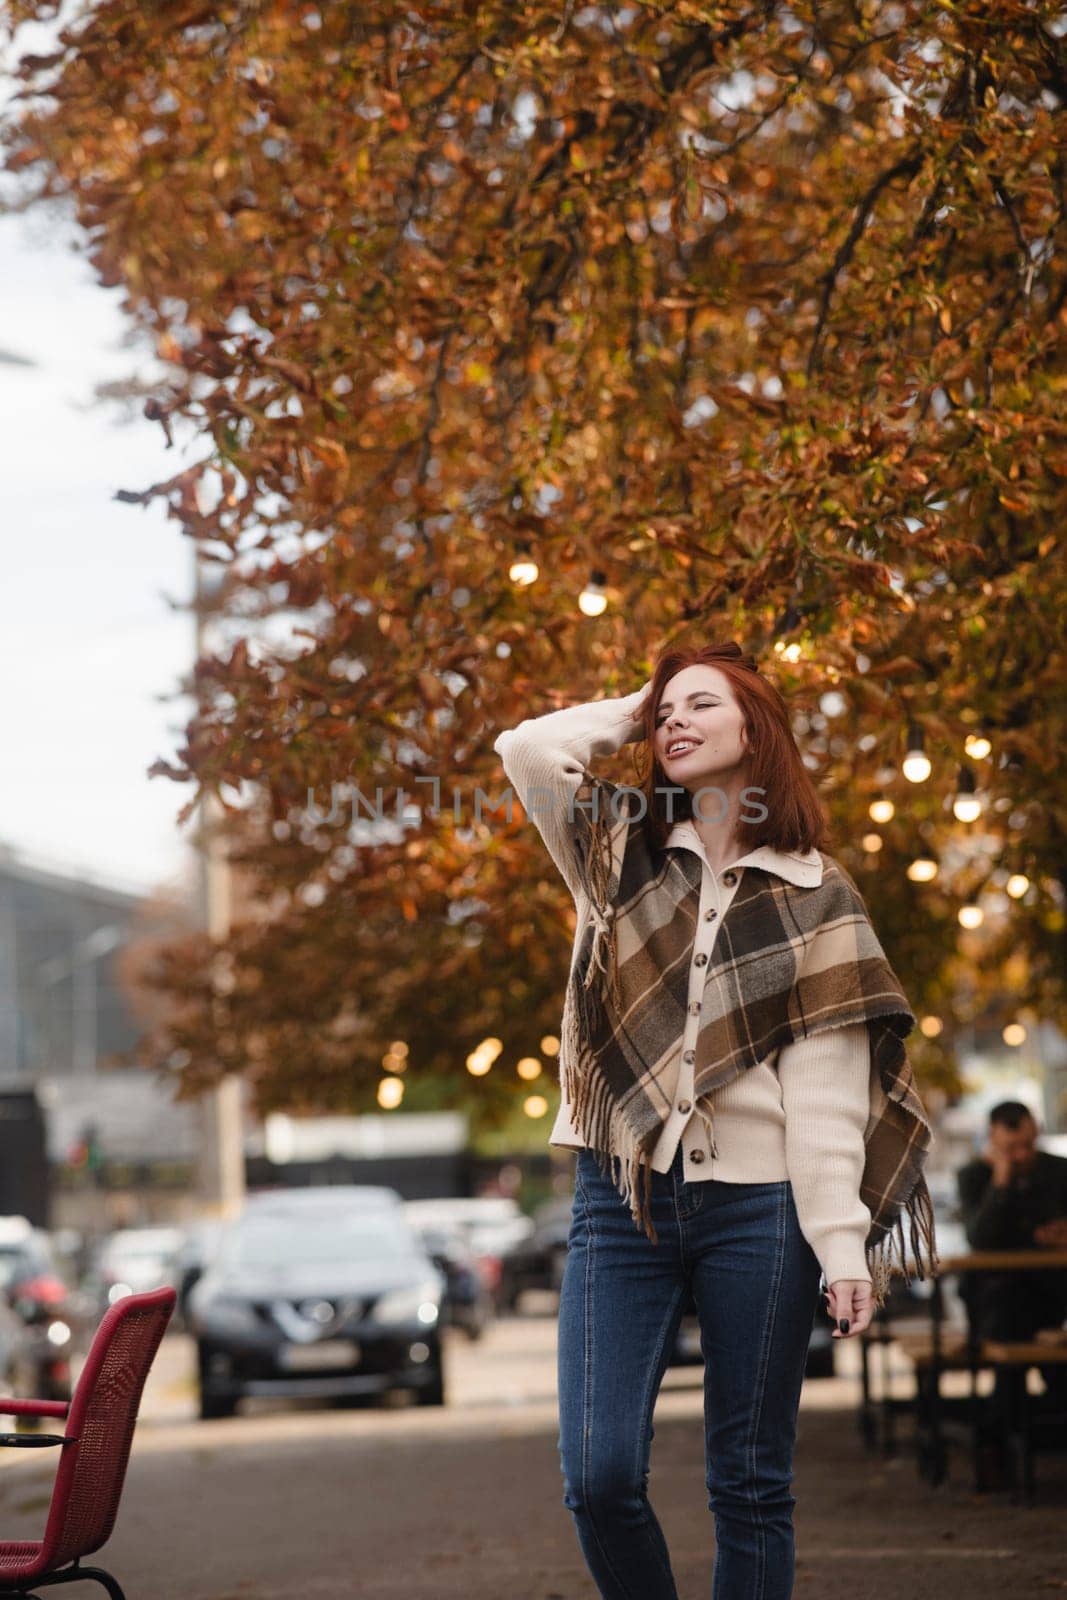 A merry red-haired girl radiates happiness as she walks through the autumn city streets. by teksomolika